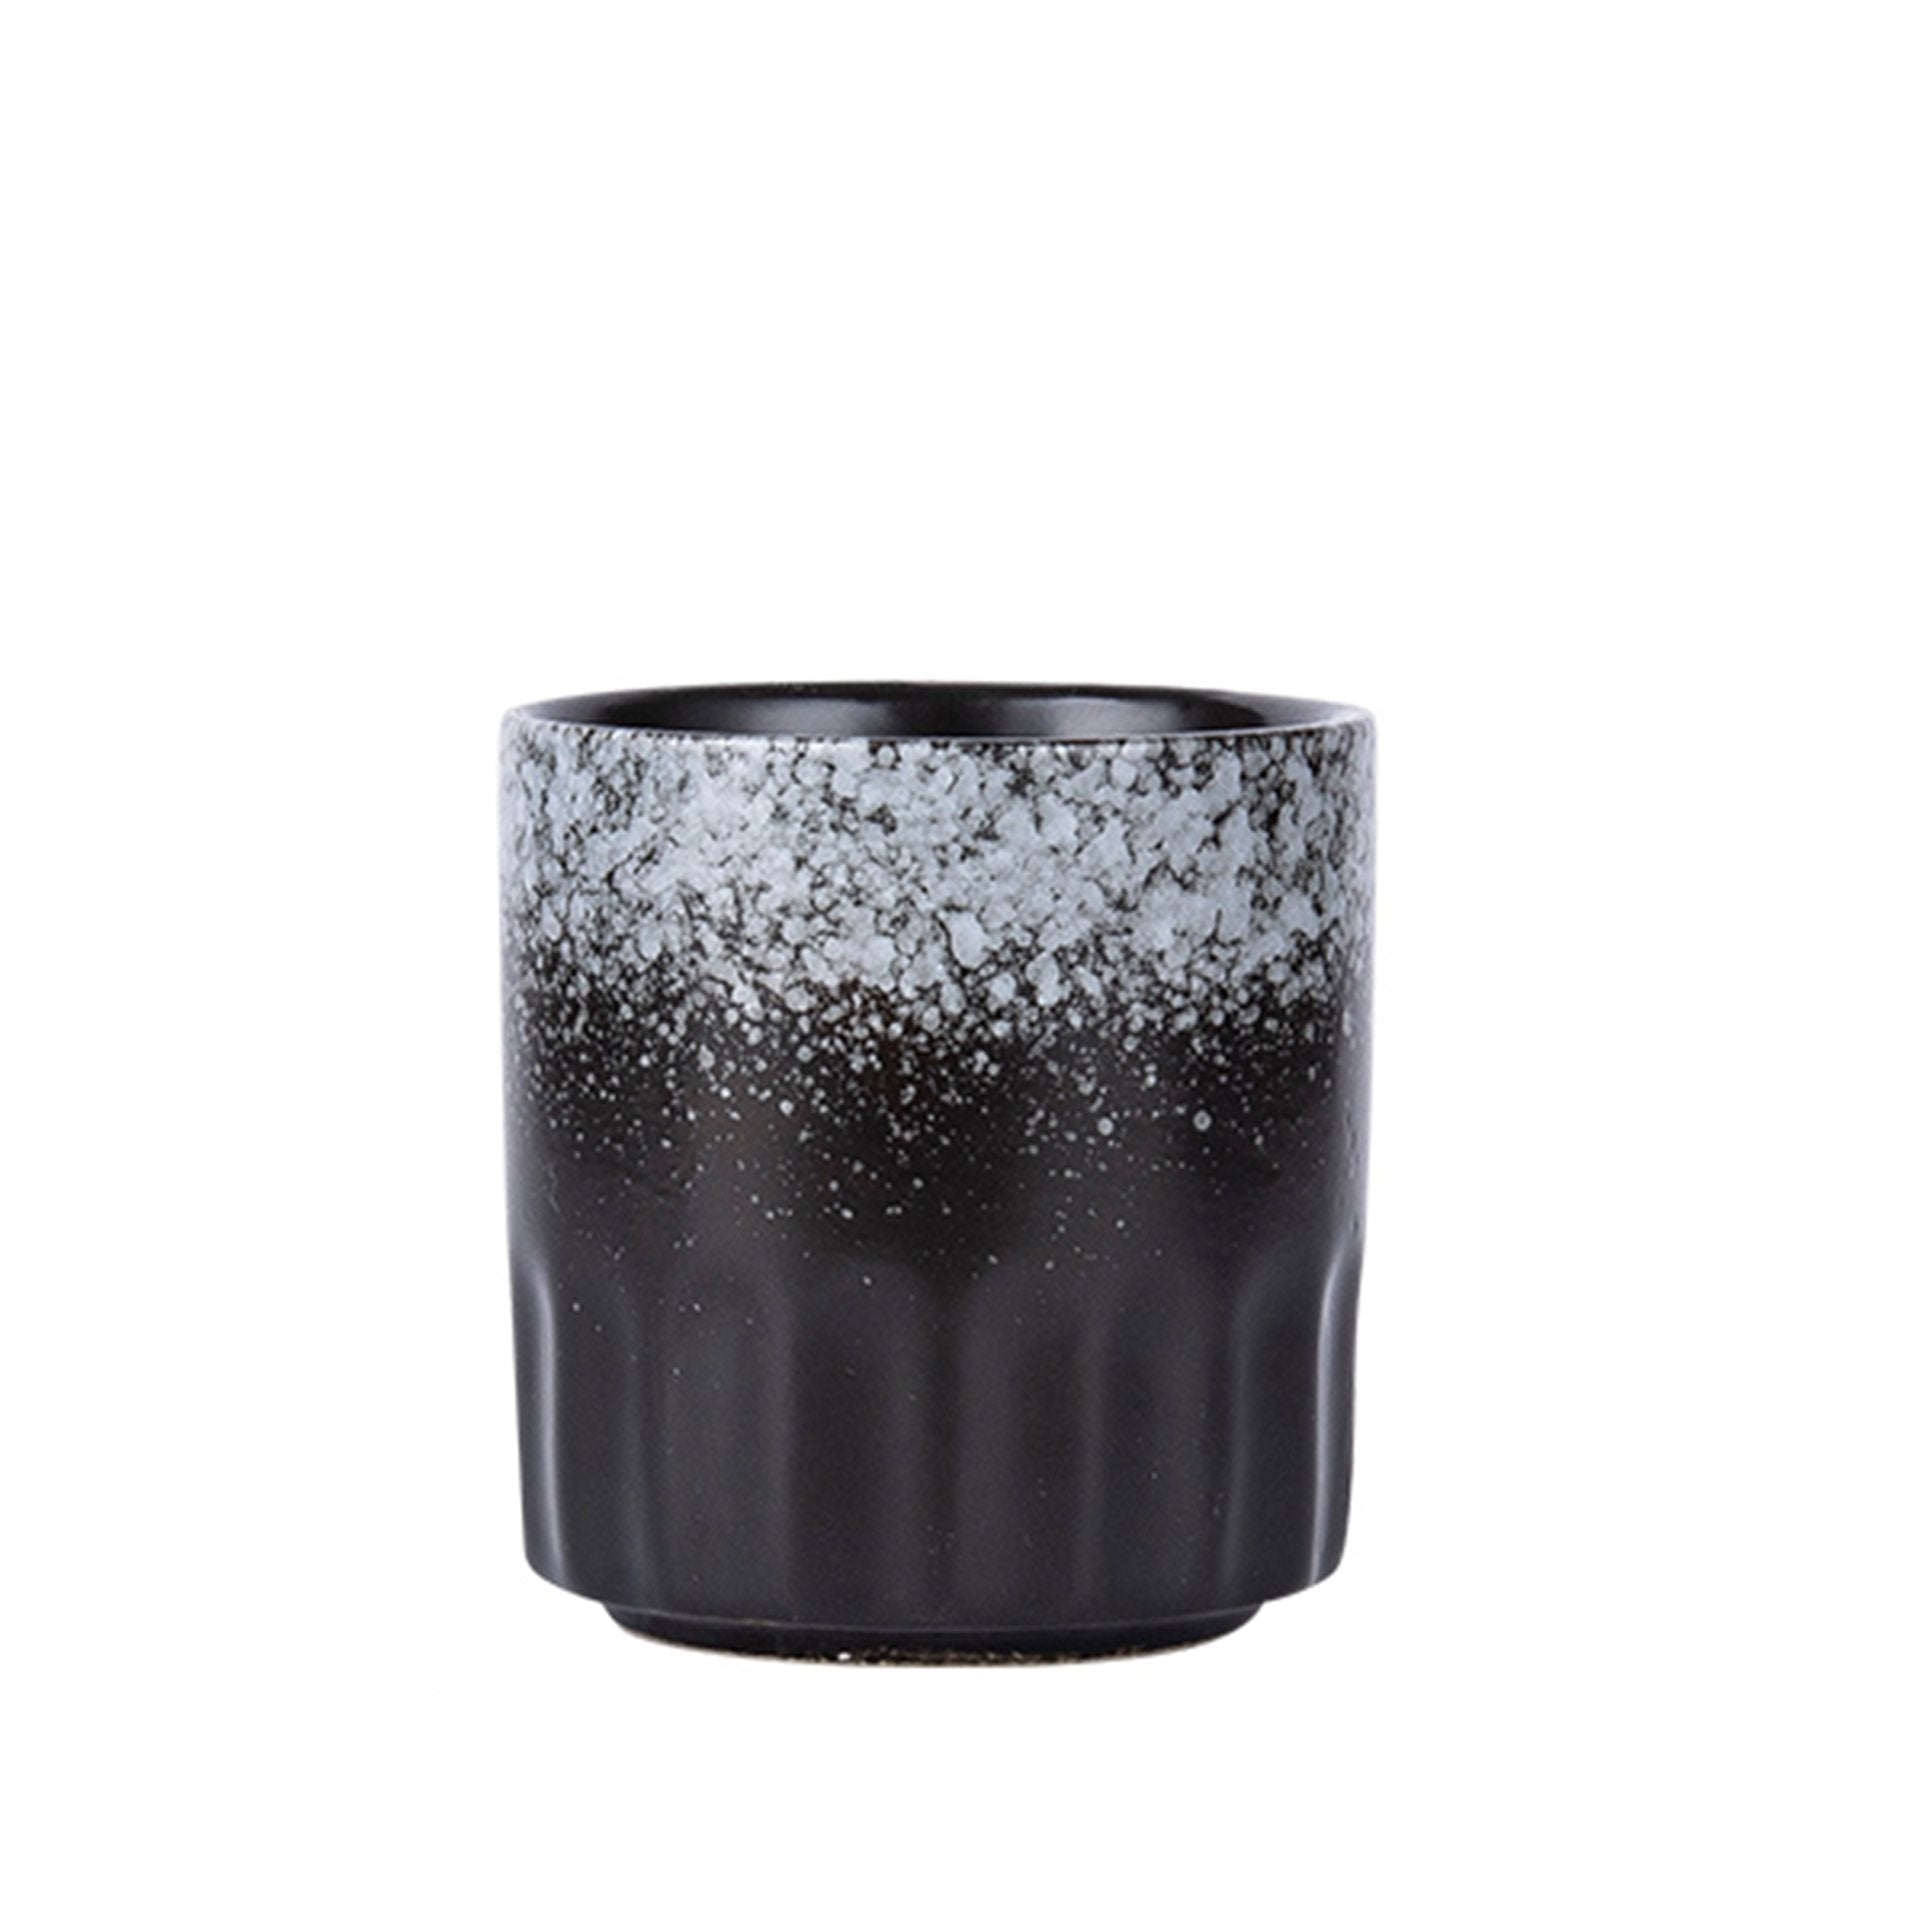 Black ceramic teacup with white frost pattern.